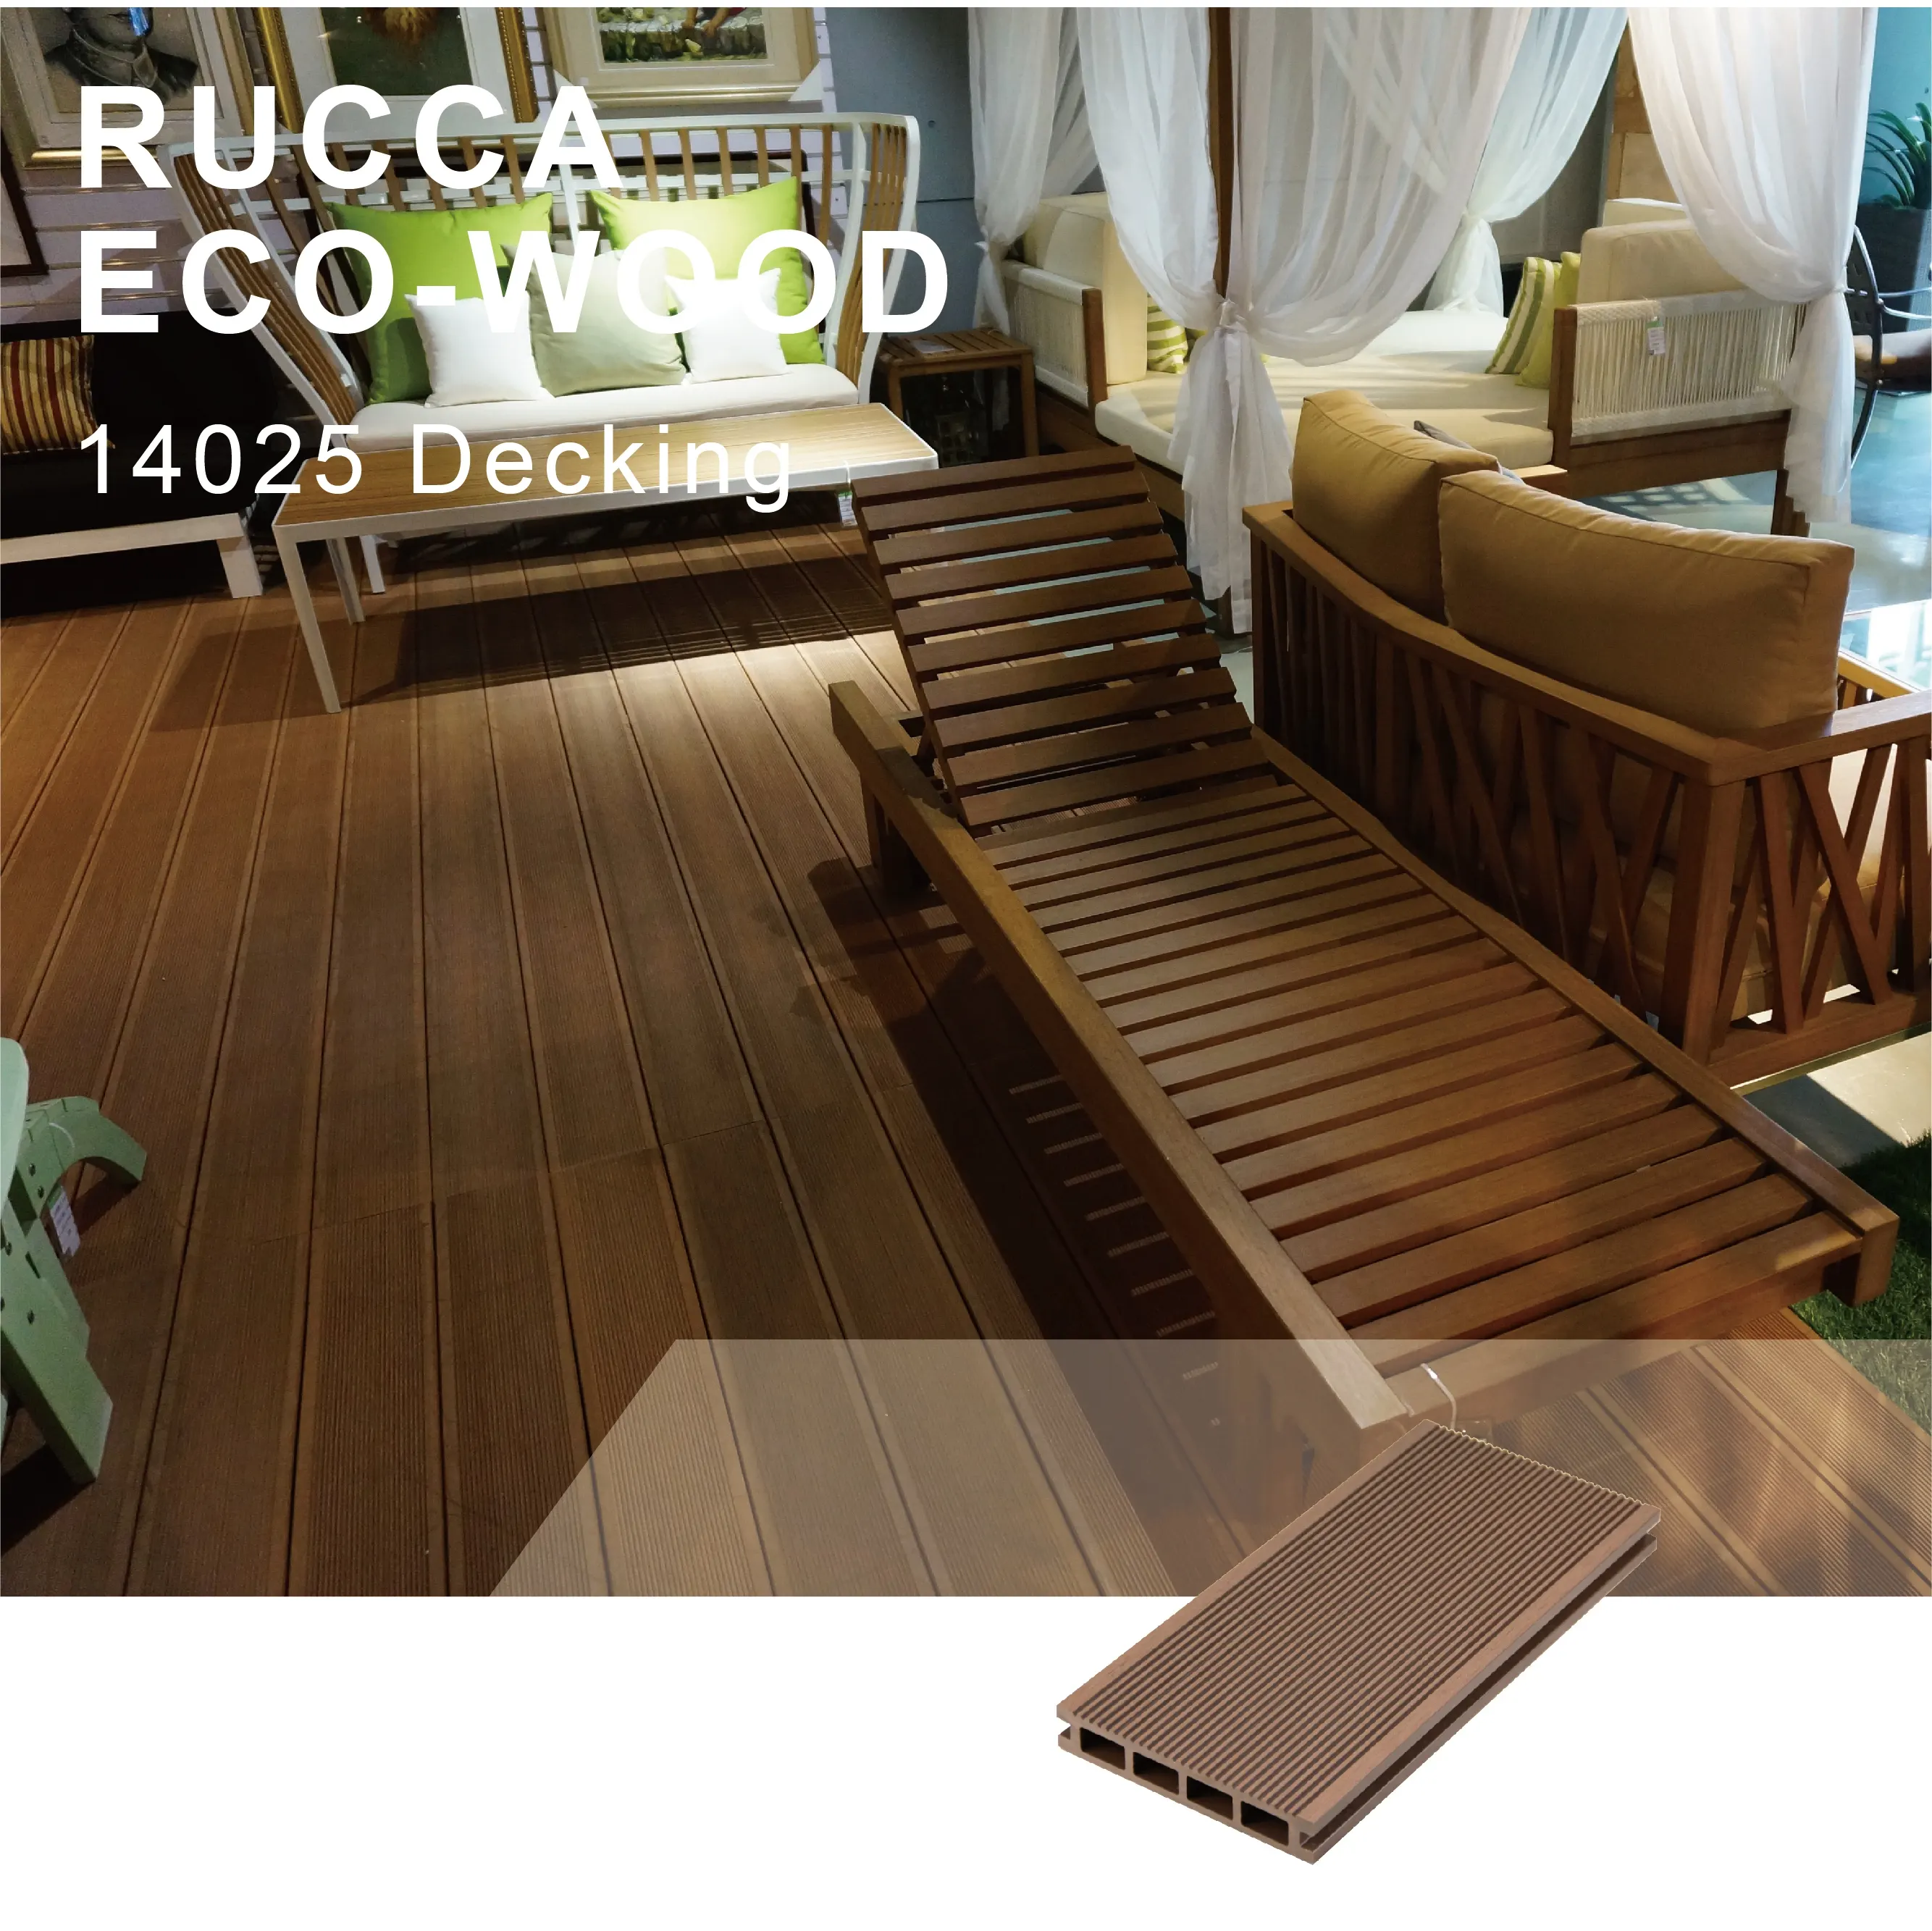 RUCCA WPC PE Wood Composite Decking WPC suppliers 140*25mm teak decking decor outdoor decking